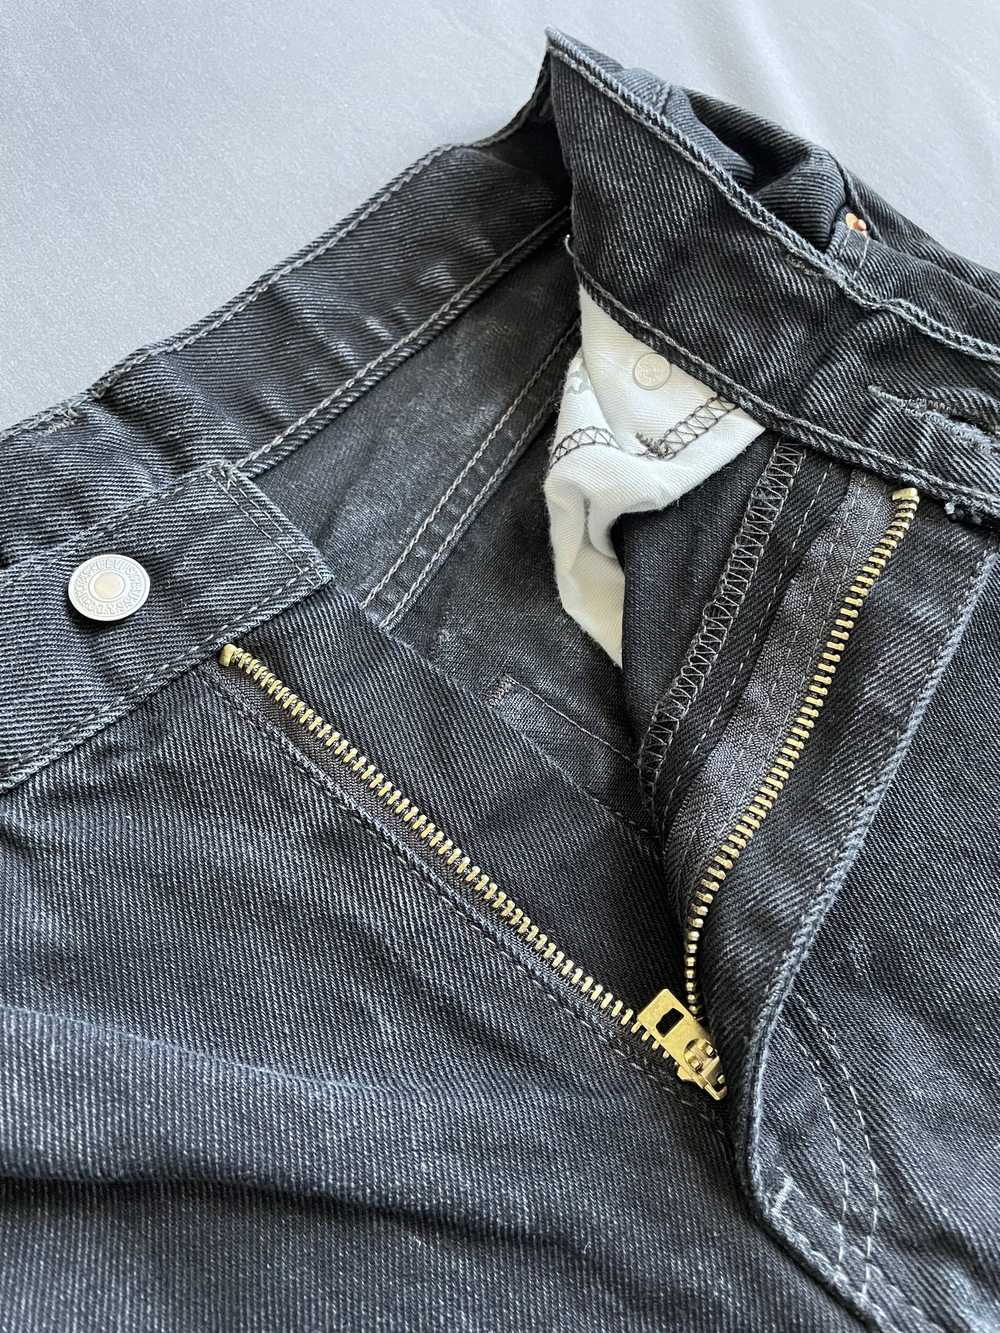 Levi's 550 Relaxed Fit Jeans - image 2